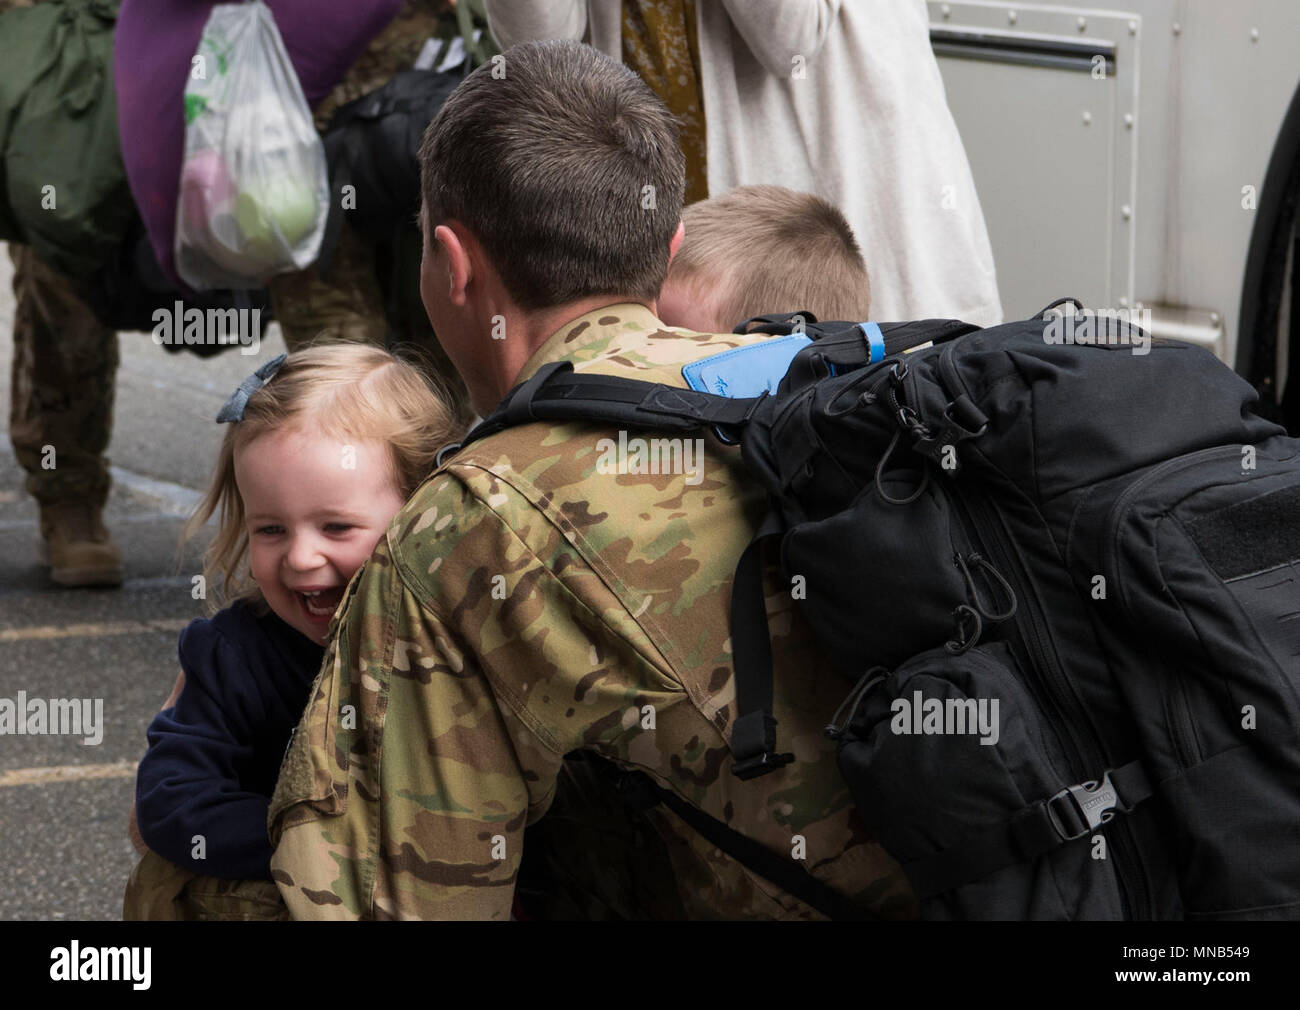 Capt. Andrew Lee, 7th Airlift Squadron C-17 Globemaster III pilot, hugs his children after returning home from a 90-day deployment in the Middle East at Joint Base Lewis-McChord, Wash., March 5, 2018. As a pilot, Lee was a part of the 816th Expeditionary Airlift Squadron at Al Udeid Air Base, Qatar, and flew a C-17 to deliver mission critical cargo and supplies within the area of responsibility. (U.S. Air Force Stock Photo